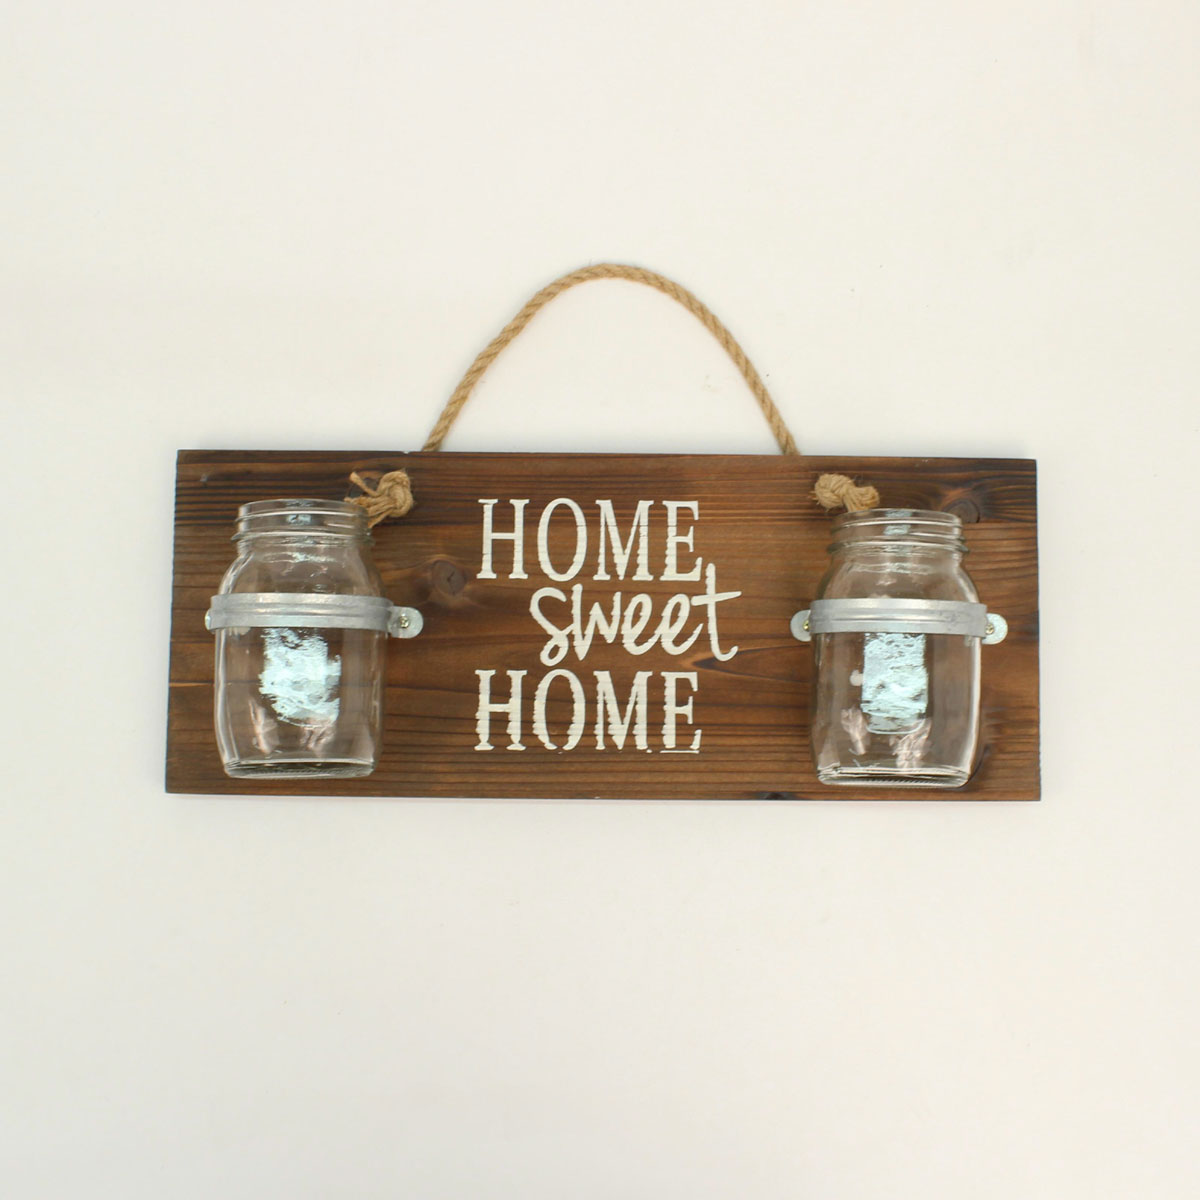 94118 Home Sweet Home Wall Decor, White Distressed Wood Planks